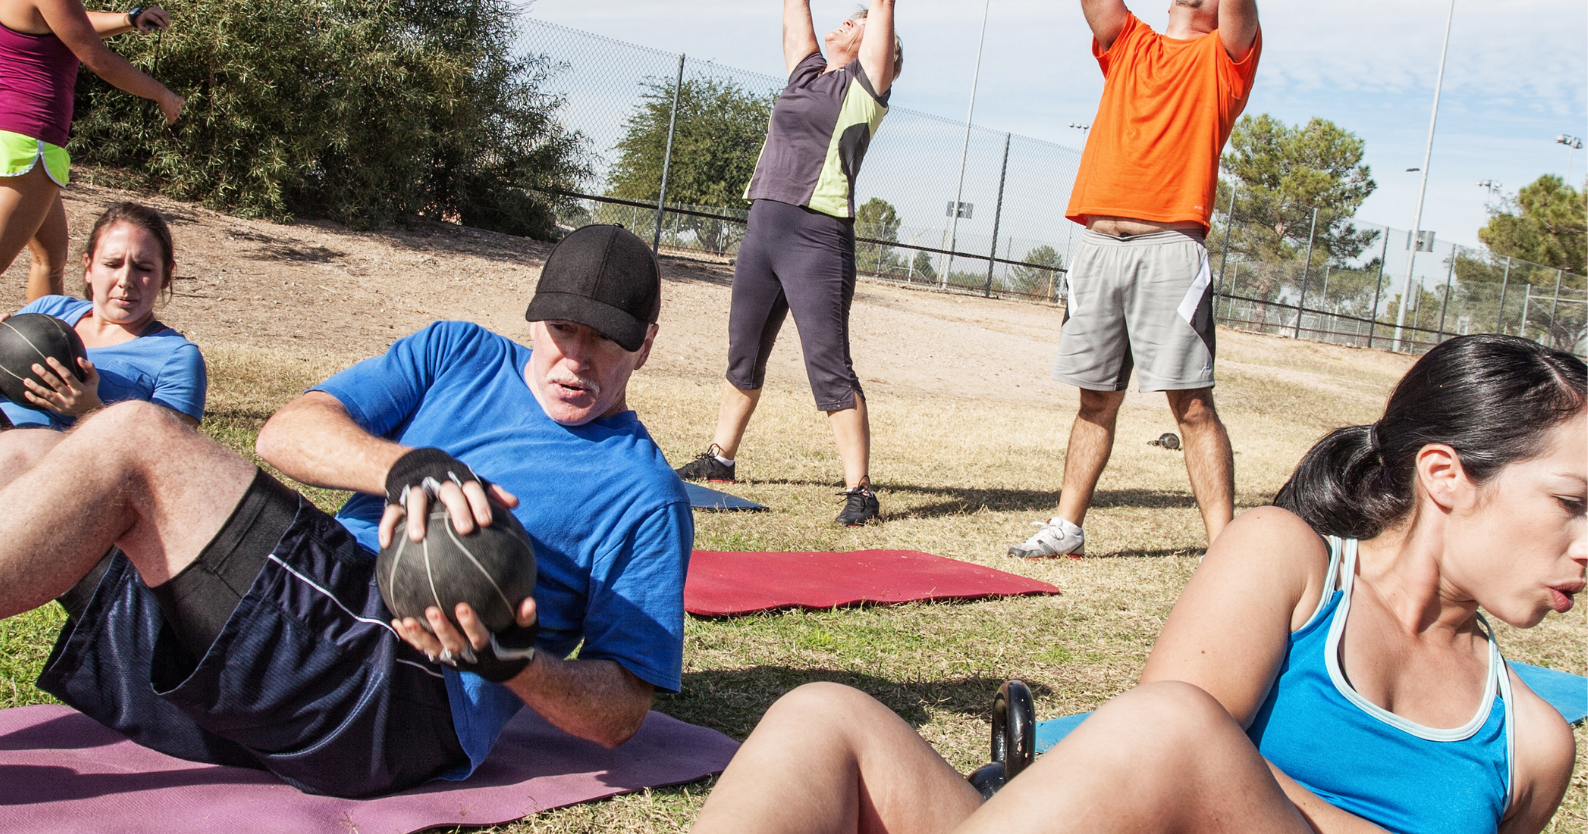 An image of an outdoor fitness class used to advertise the FlynnFit Bootcamp.